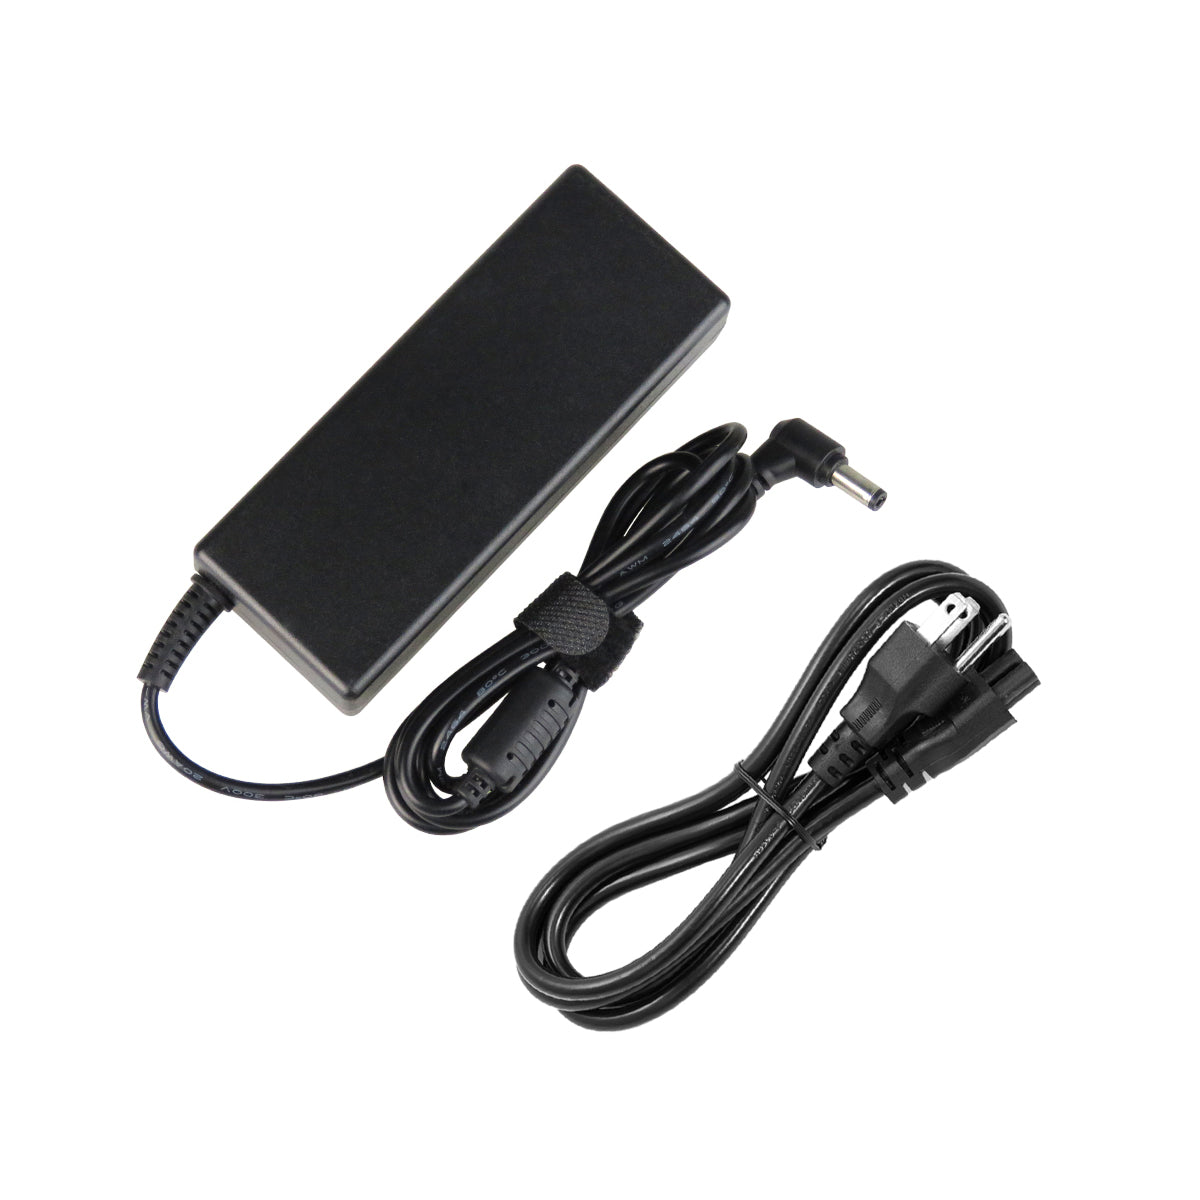 AC Adapter Charger for Gateway MX8500 Notebook.